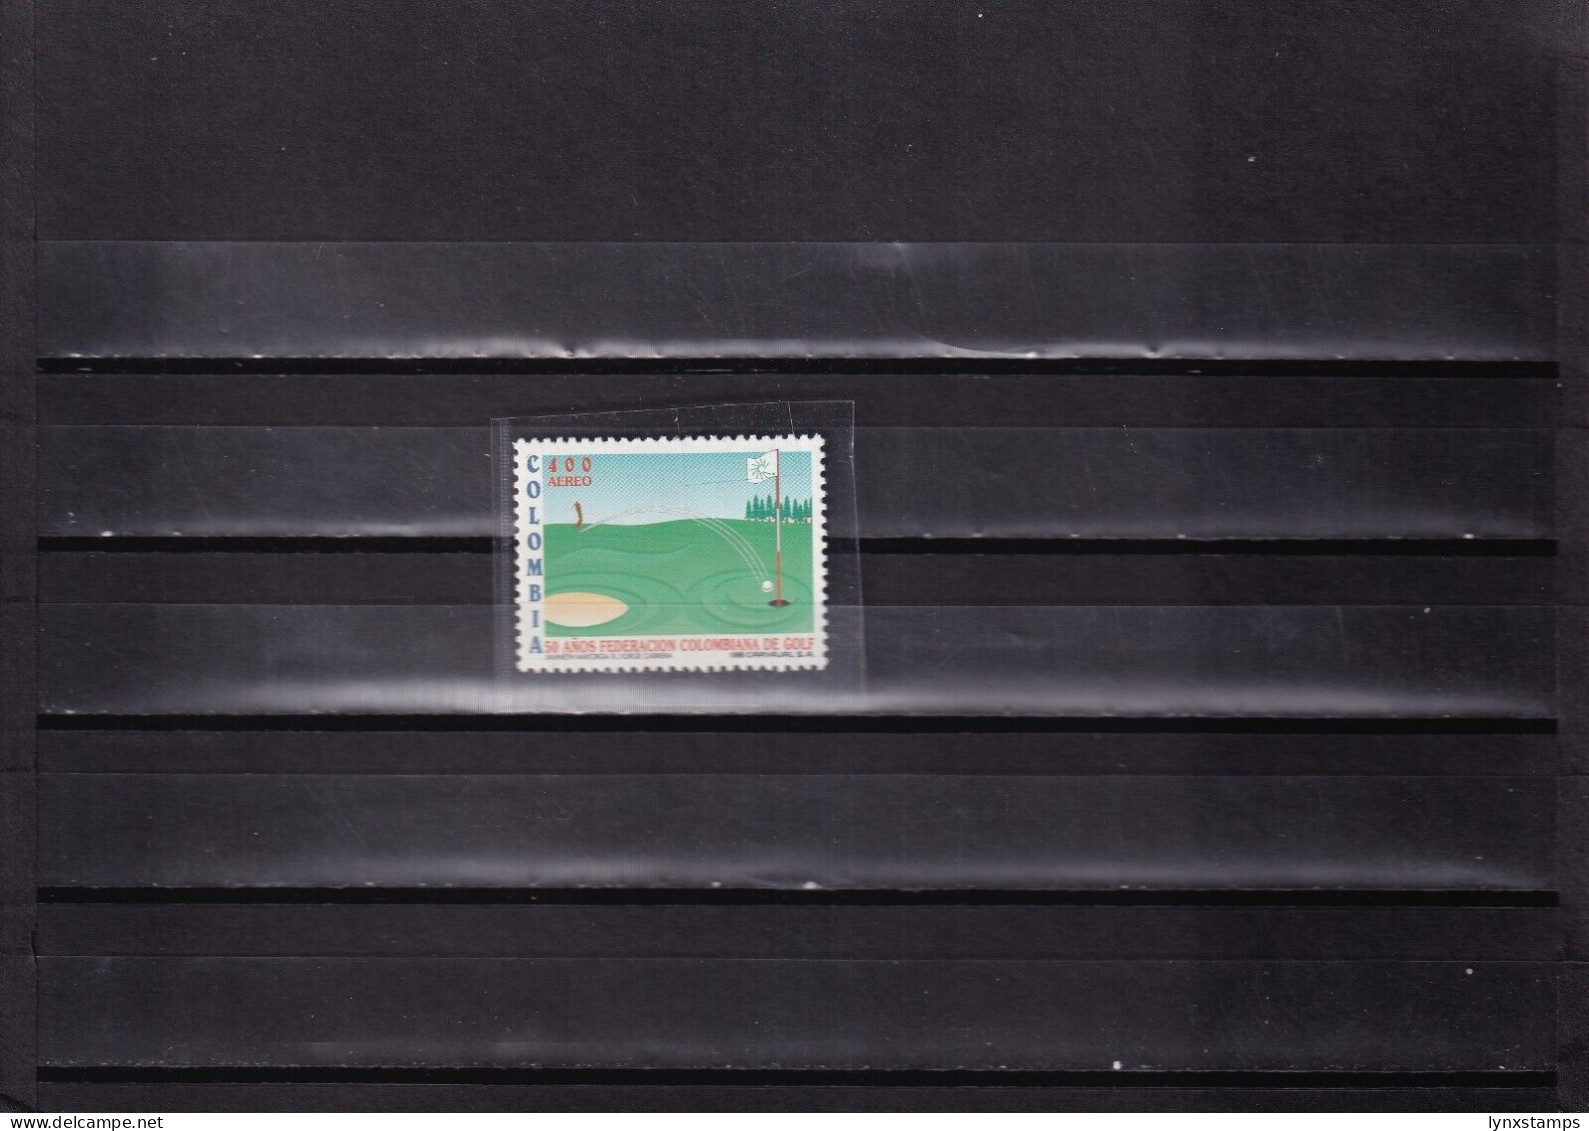 ER03 Colombia 1996 Colombian Golf Federation 50th Anniv. MNH Stamp - Colombia